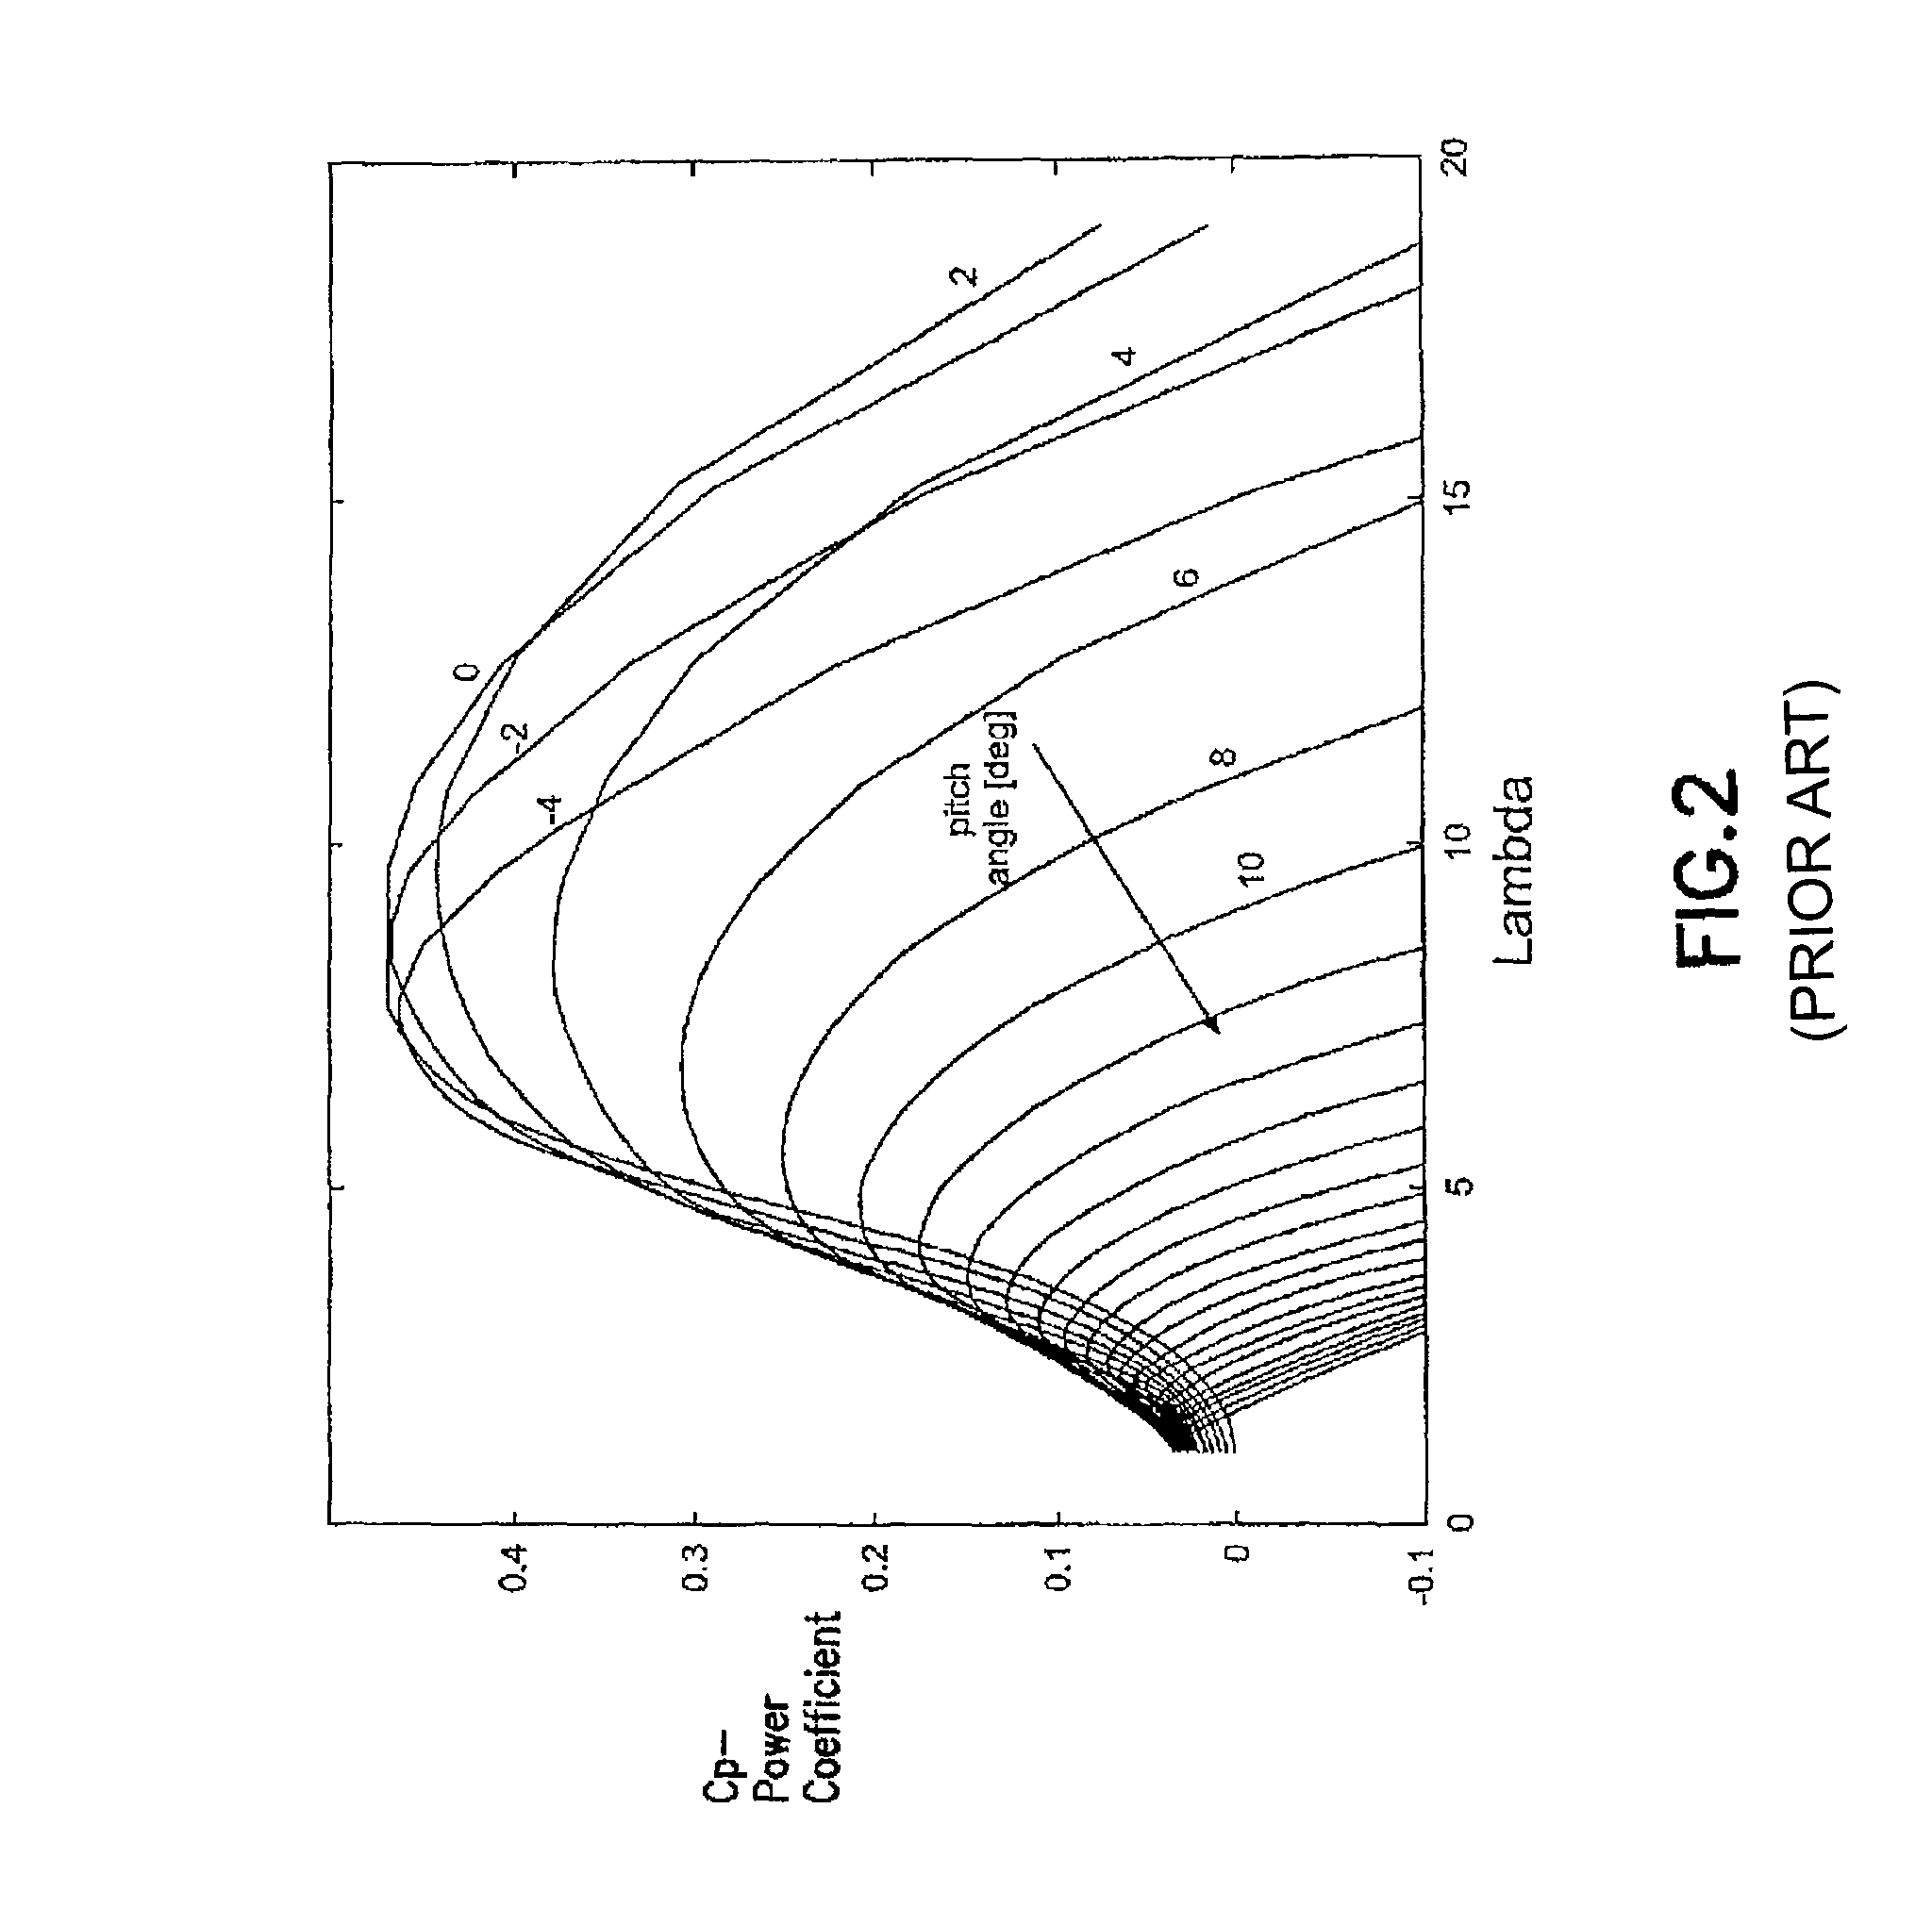 Variable speed wind turbine with a doubly-fed induction generator and rotor and grid inverters that use scalar controls